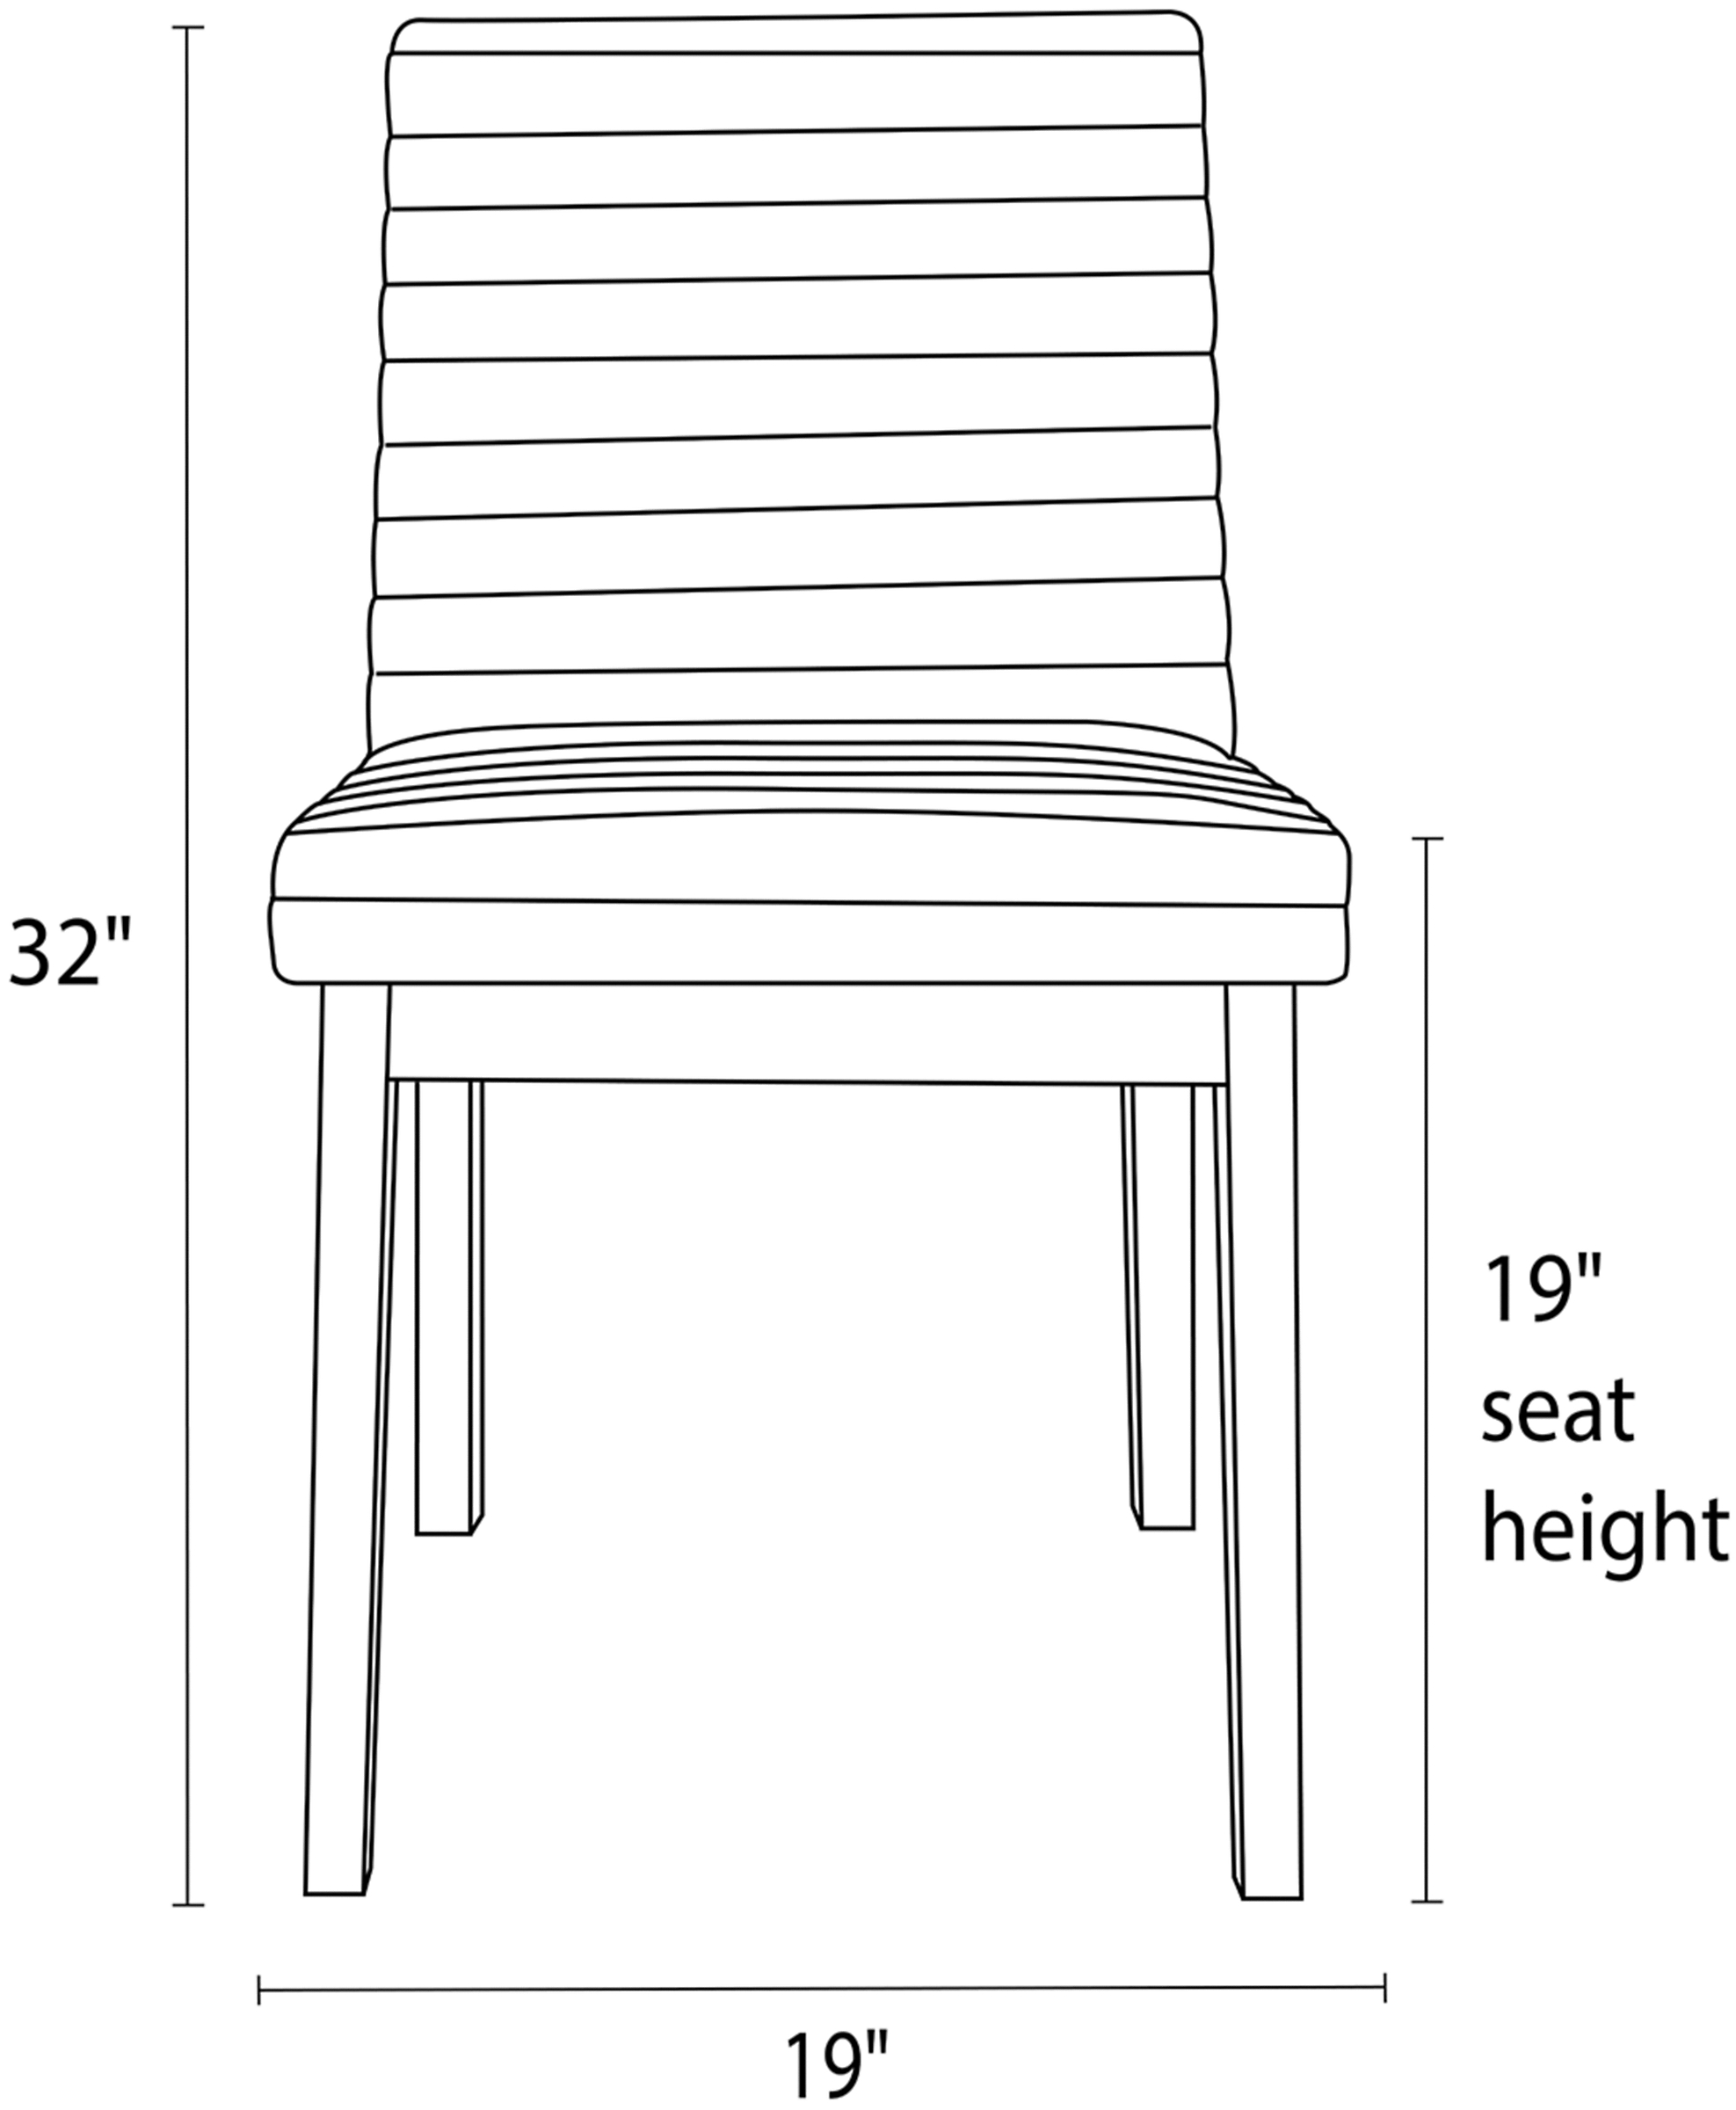 Front Dimension Drawing of Olsen dining side chair.